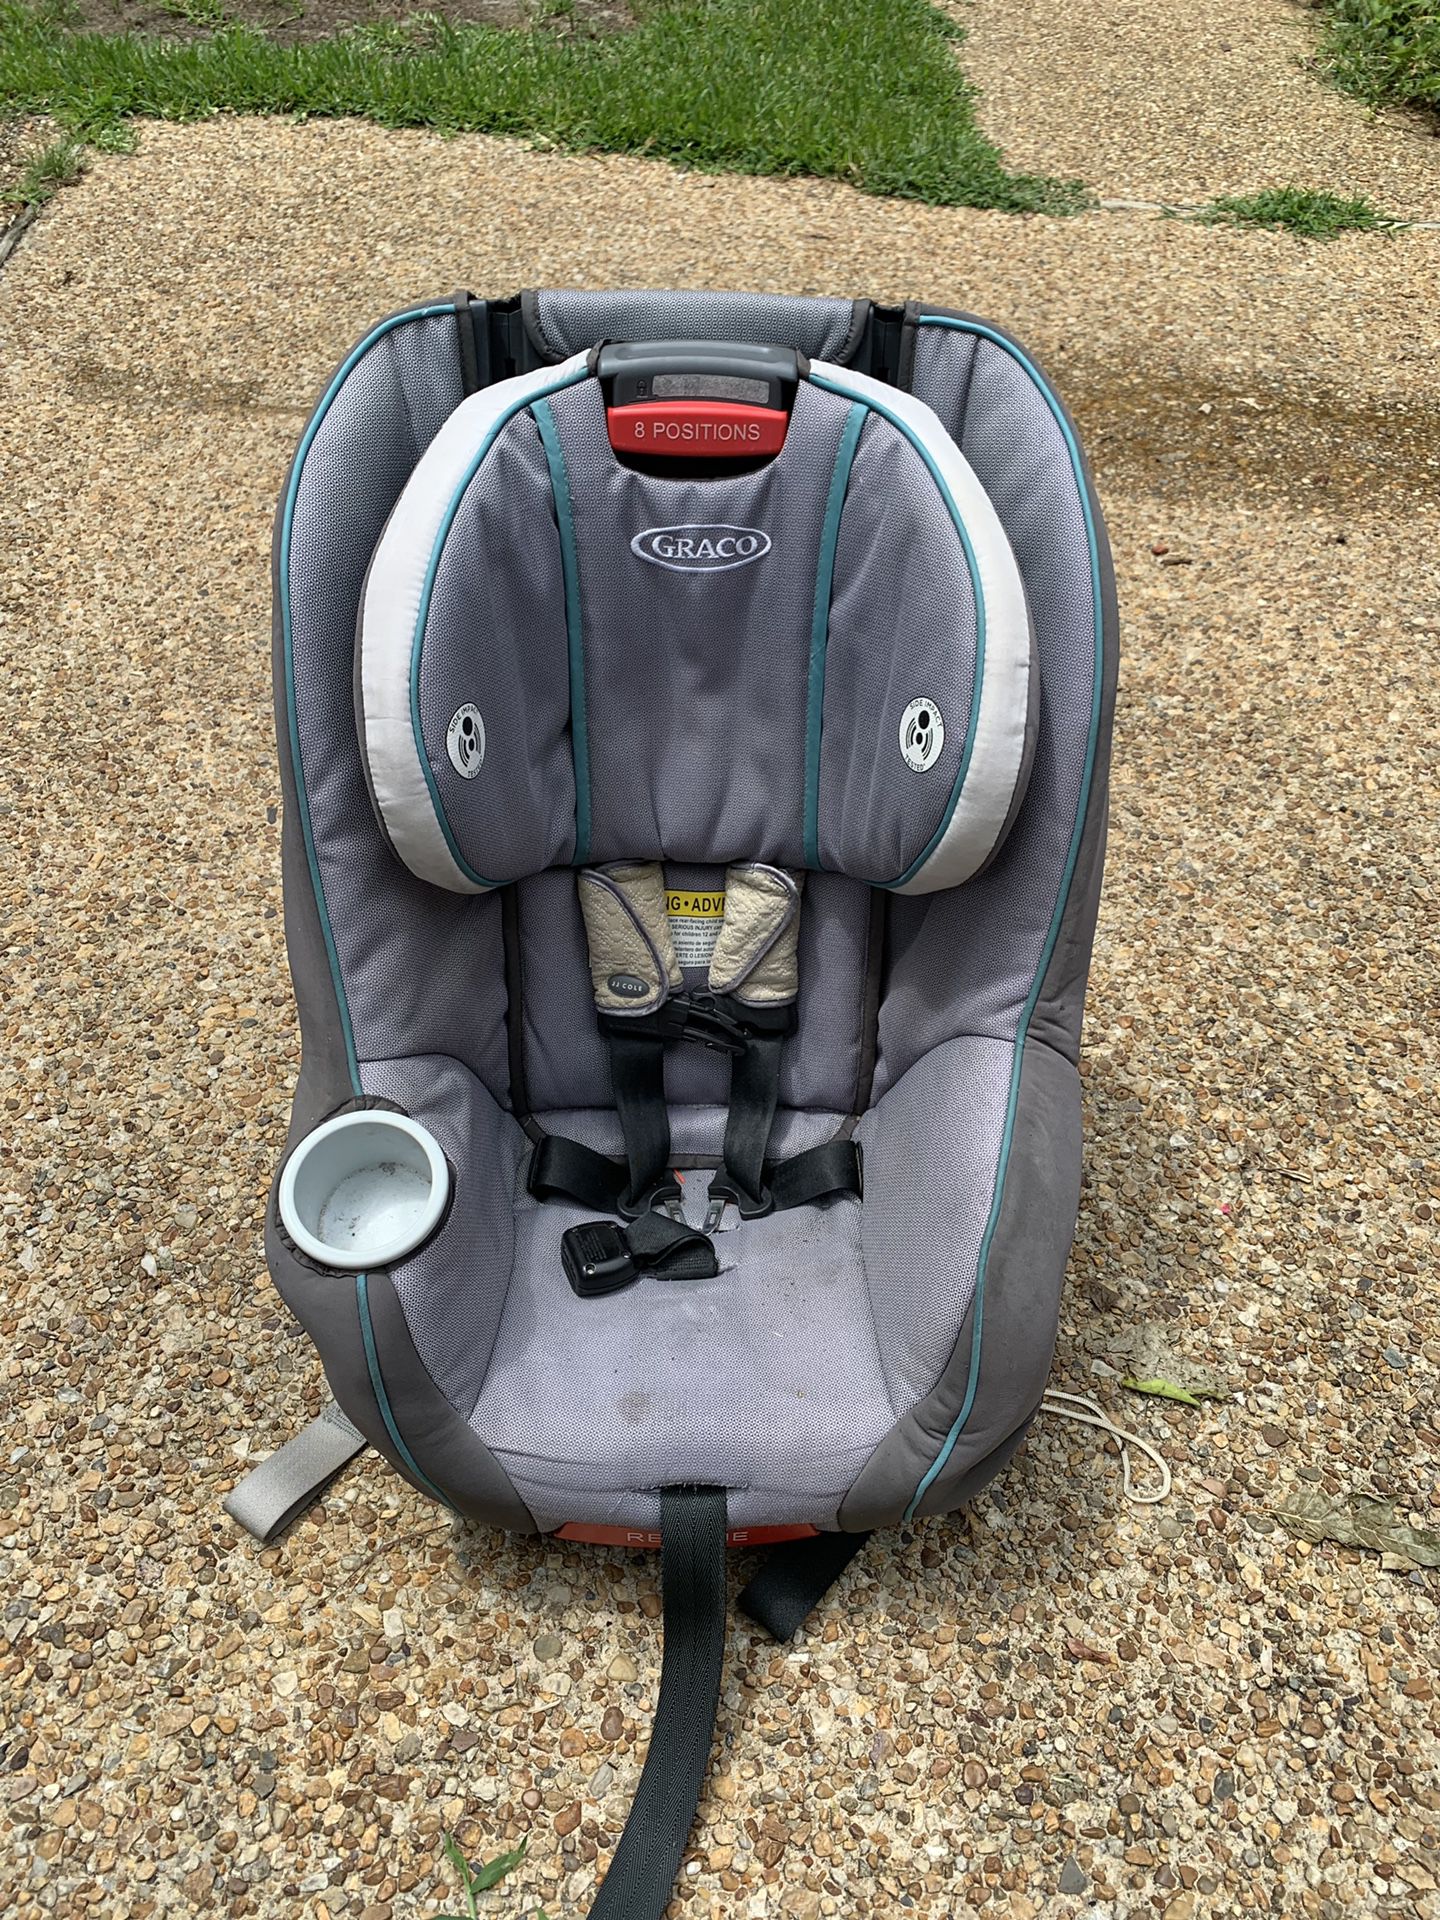 Graco baby seat for car